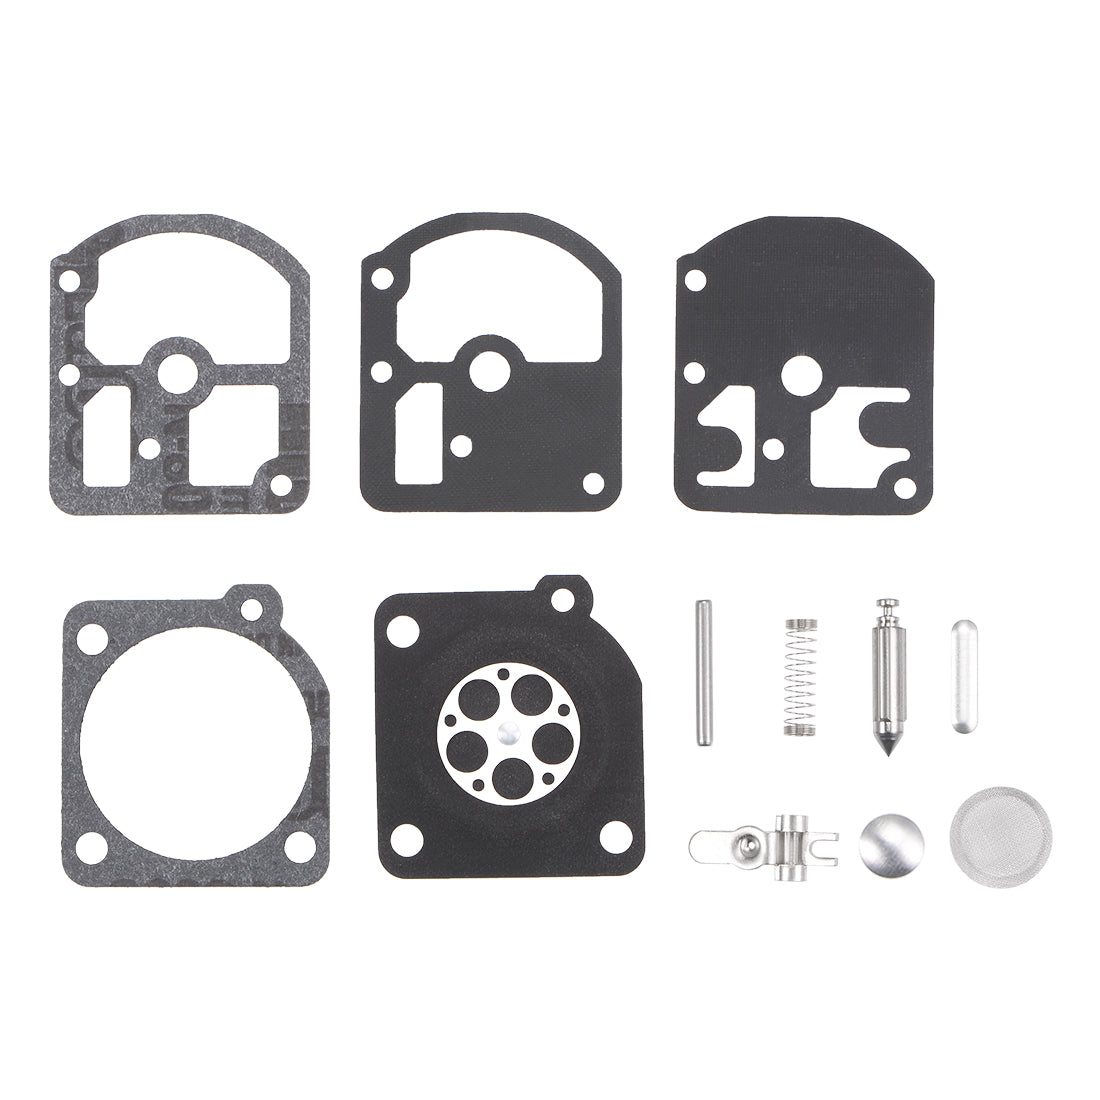 uxcell Uxcell RB-3uretor Rebuild Kit Gasket Diaphragm for RB-3 330 Series Chainsaw Engines